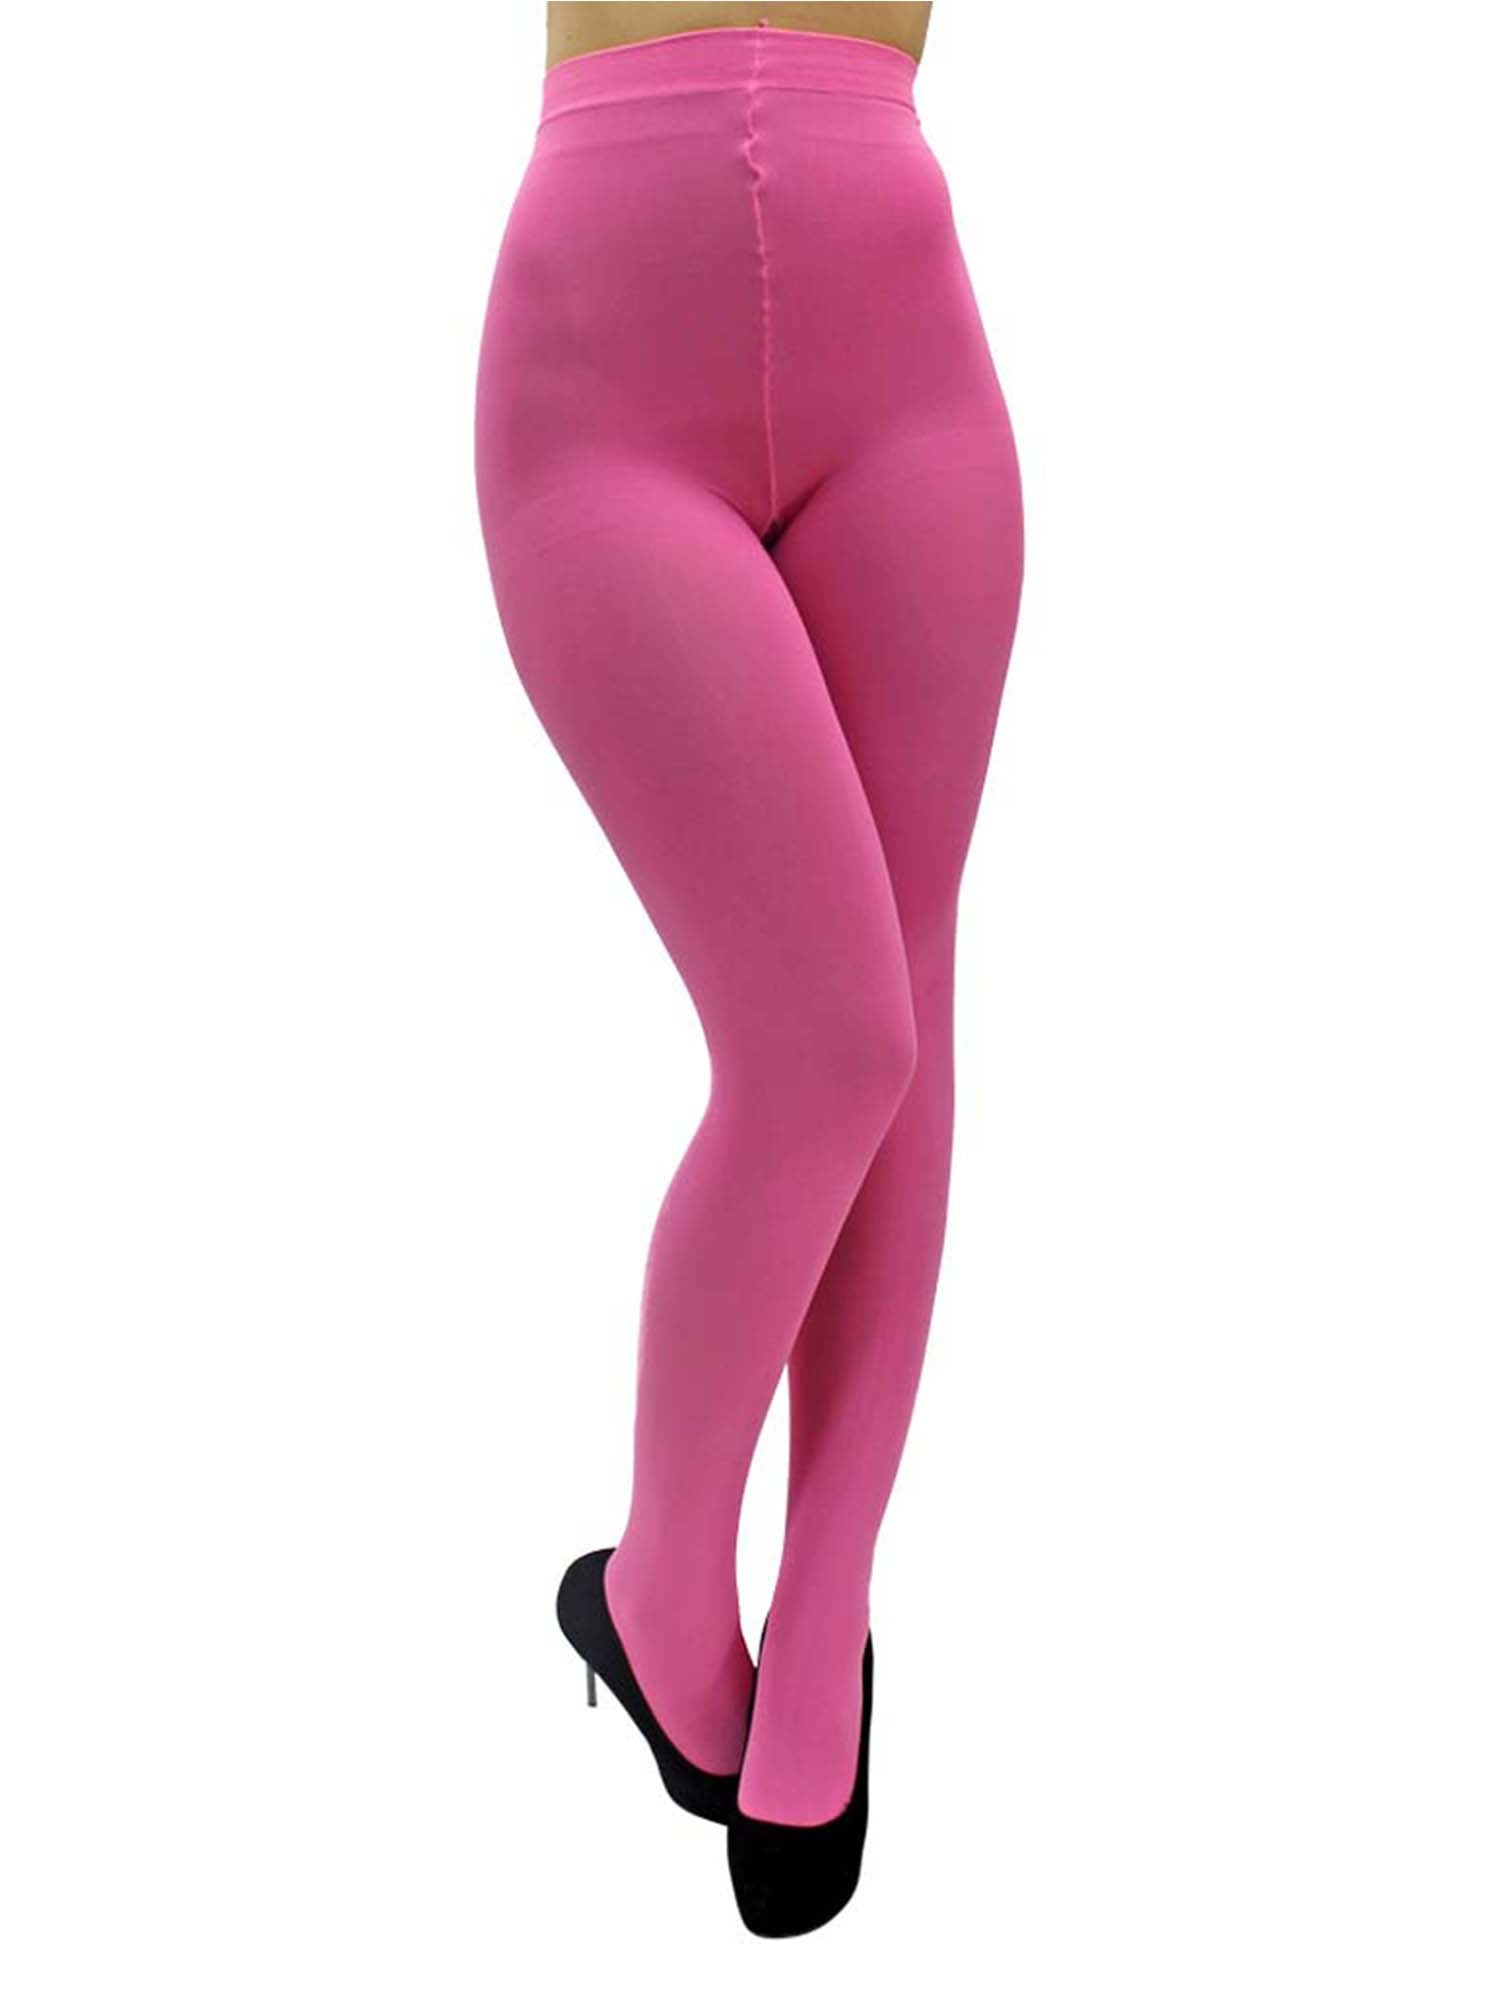 Hot Pink Tights and pantyhose for Women